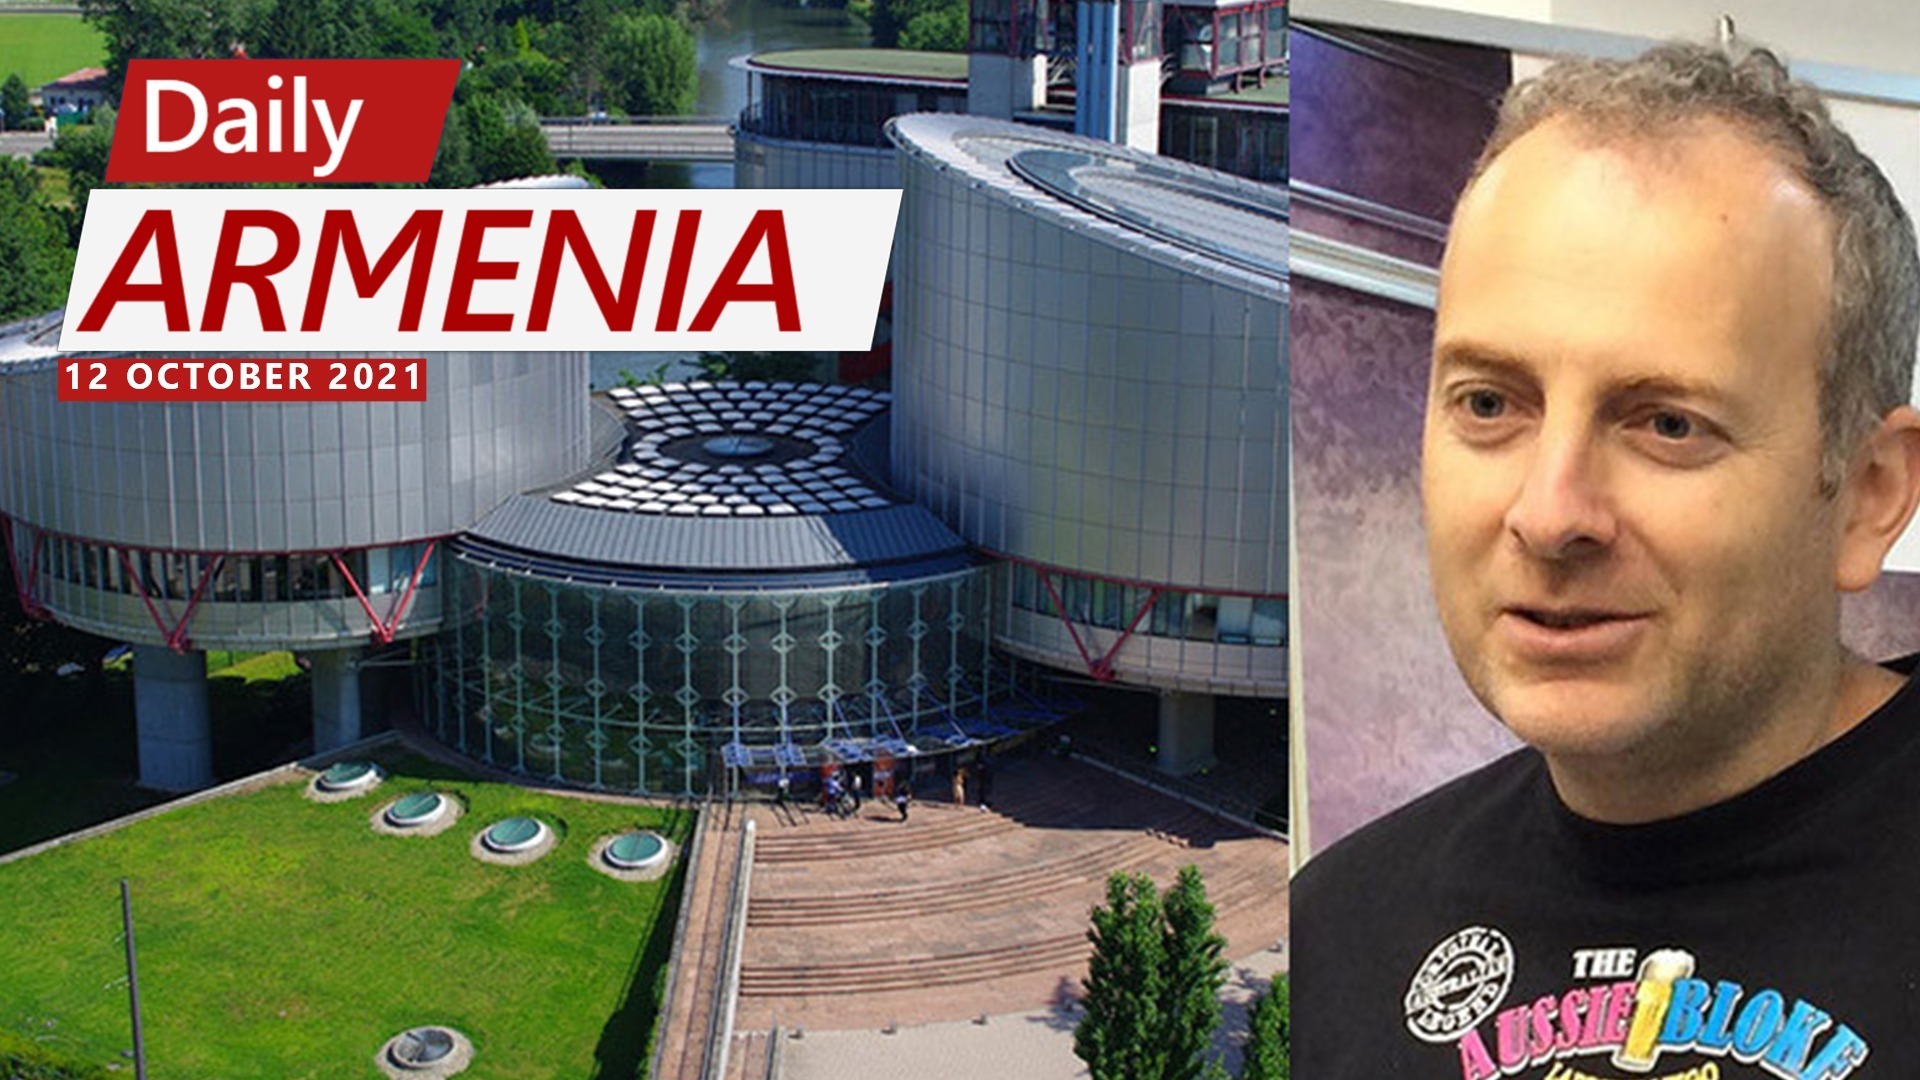 European Court of Human Rights rejects Azerbaijan’s appeal against Alexander Lapshin